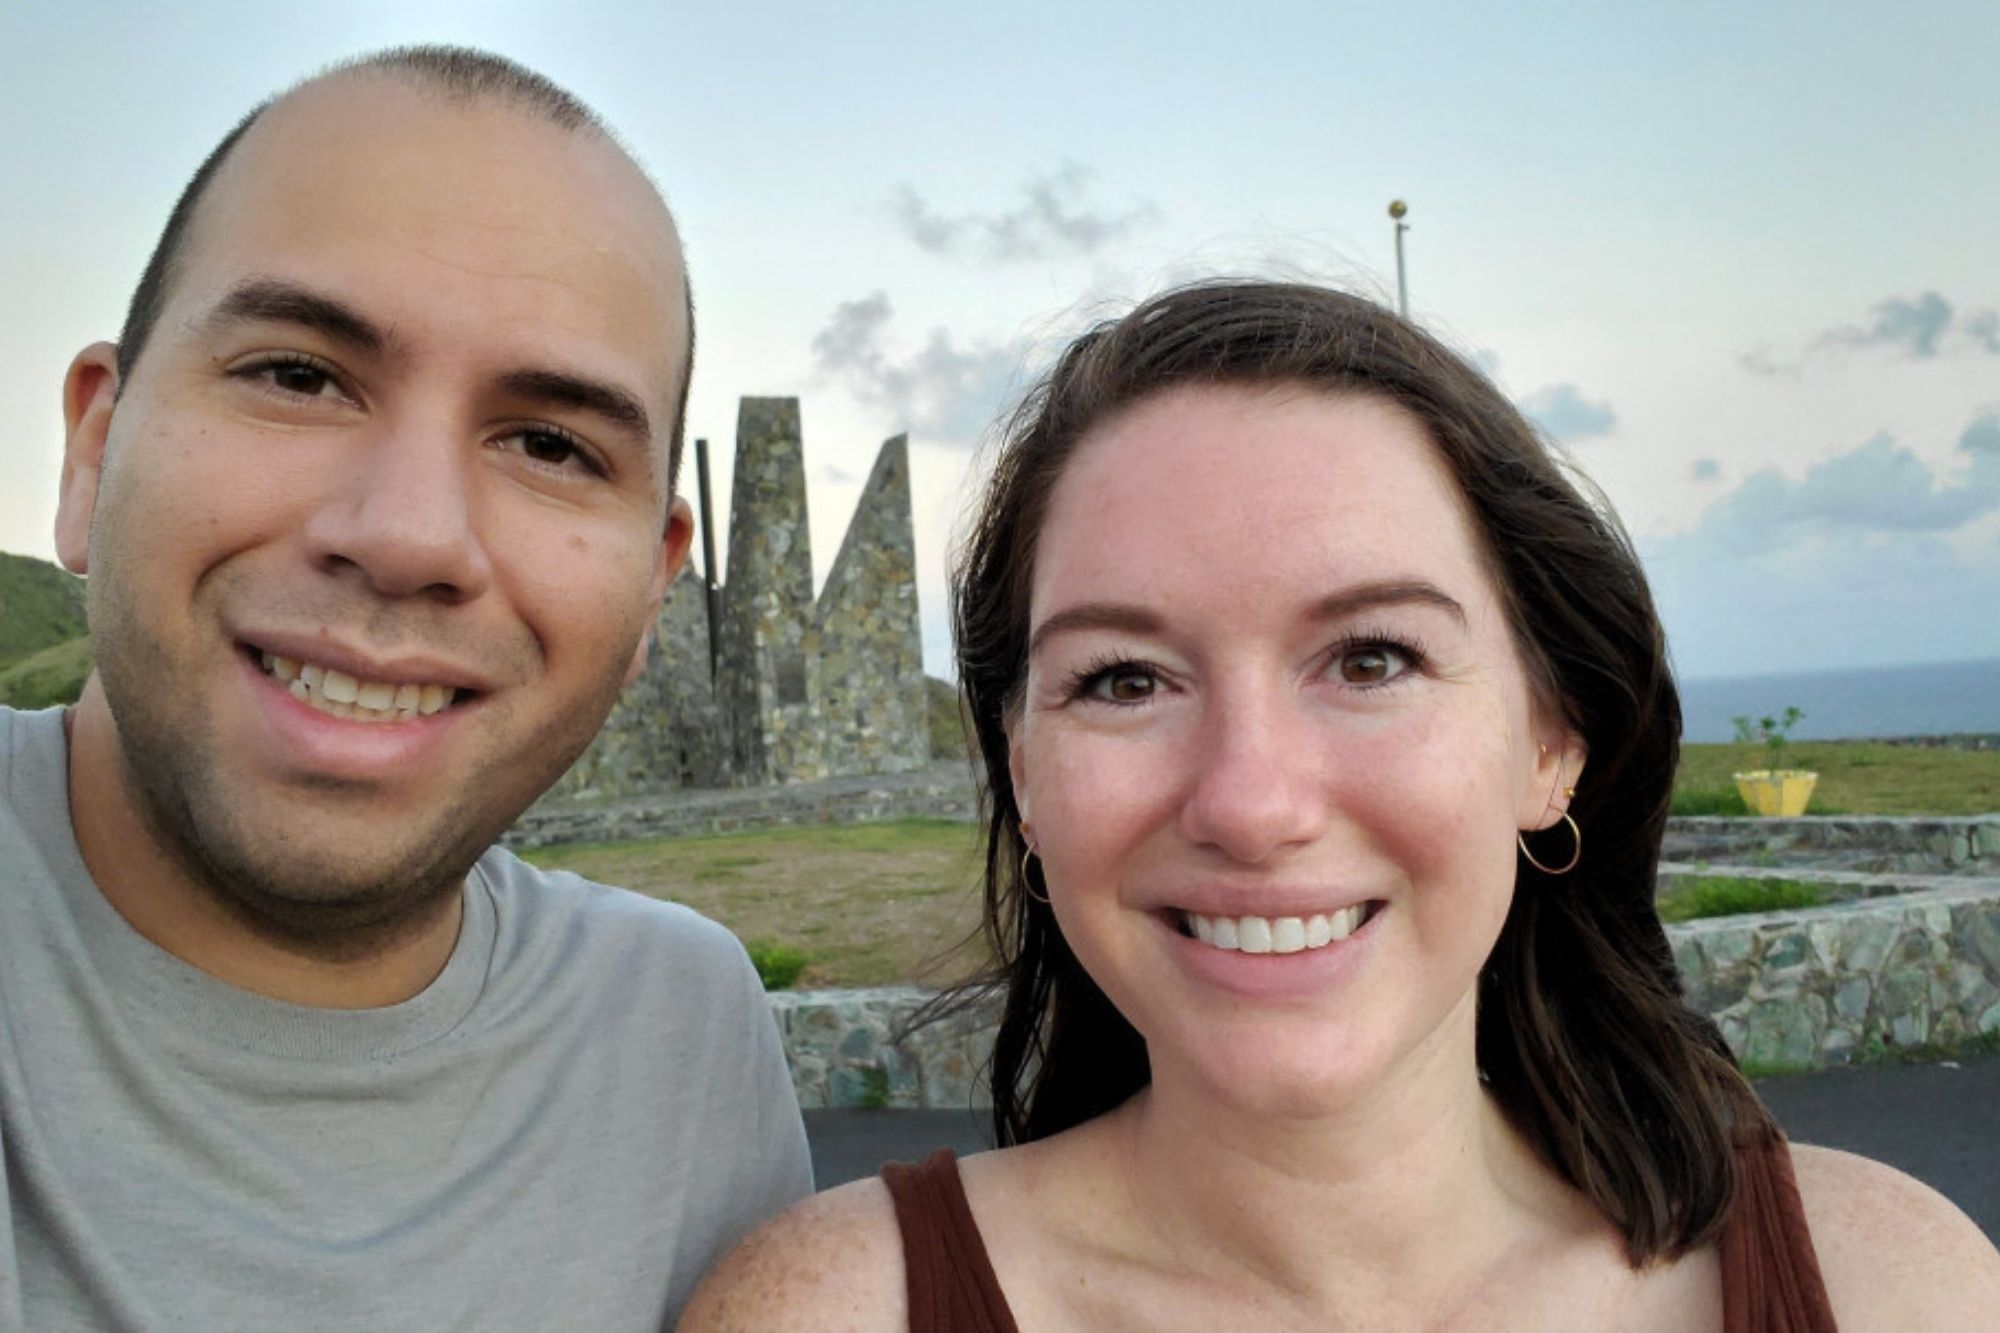 Michael and Alyssa are in front of a pointy monument made of stone and arranged in a circle